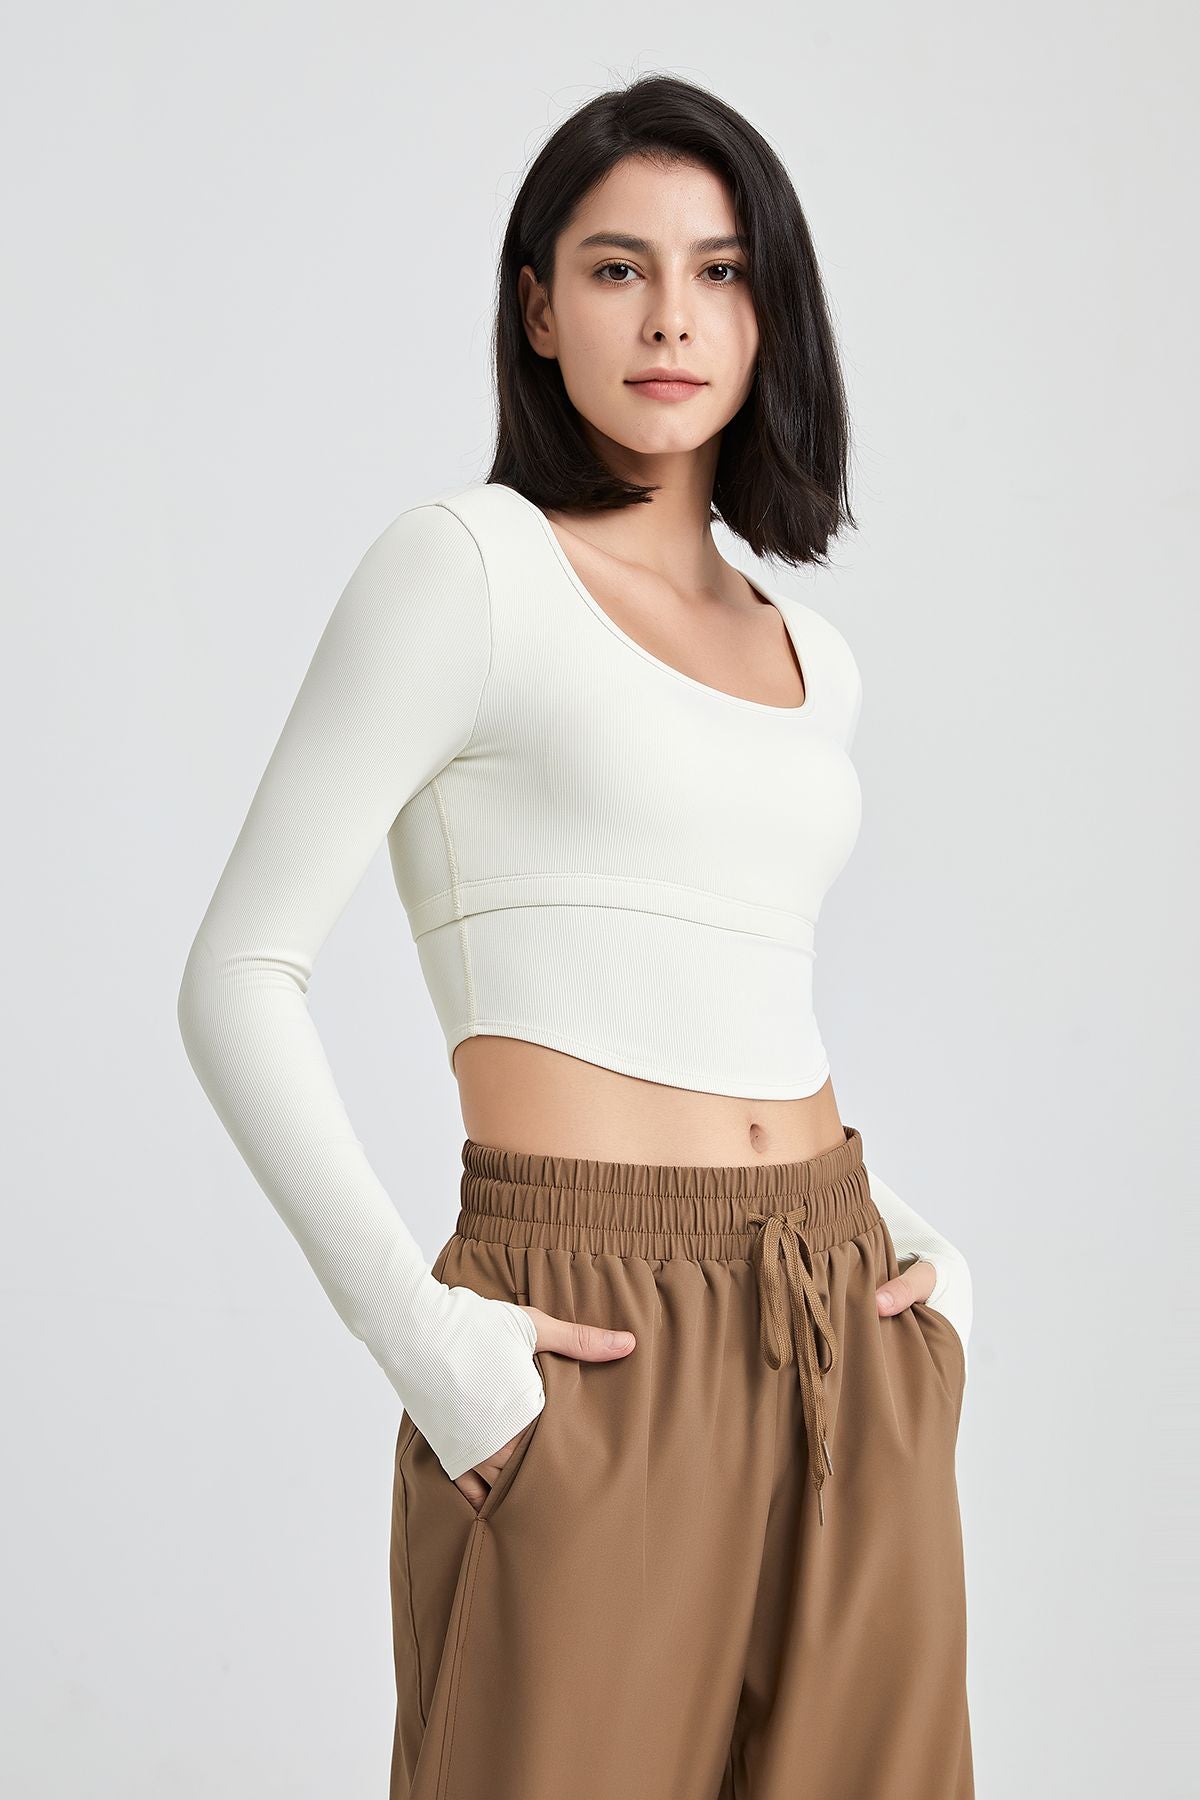 Ribbed Long Sleeve Crop Shirts with Built In Bra for Women – Zioccie